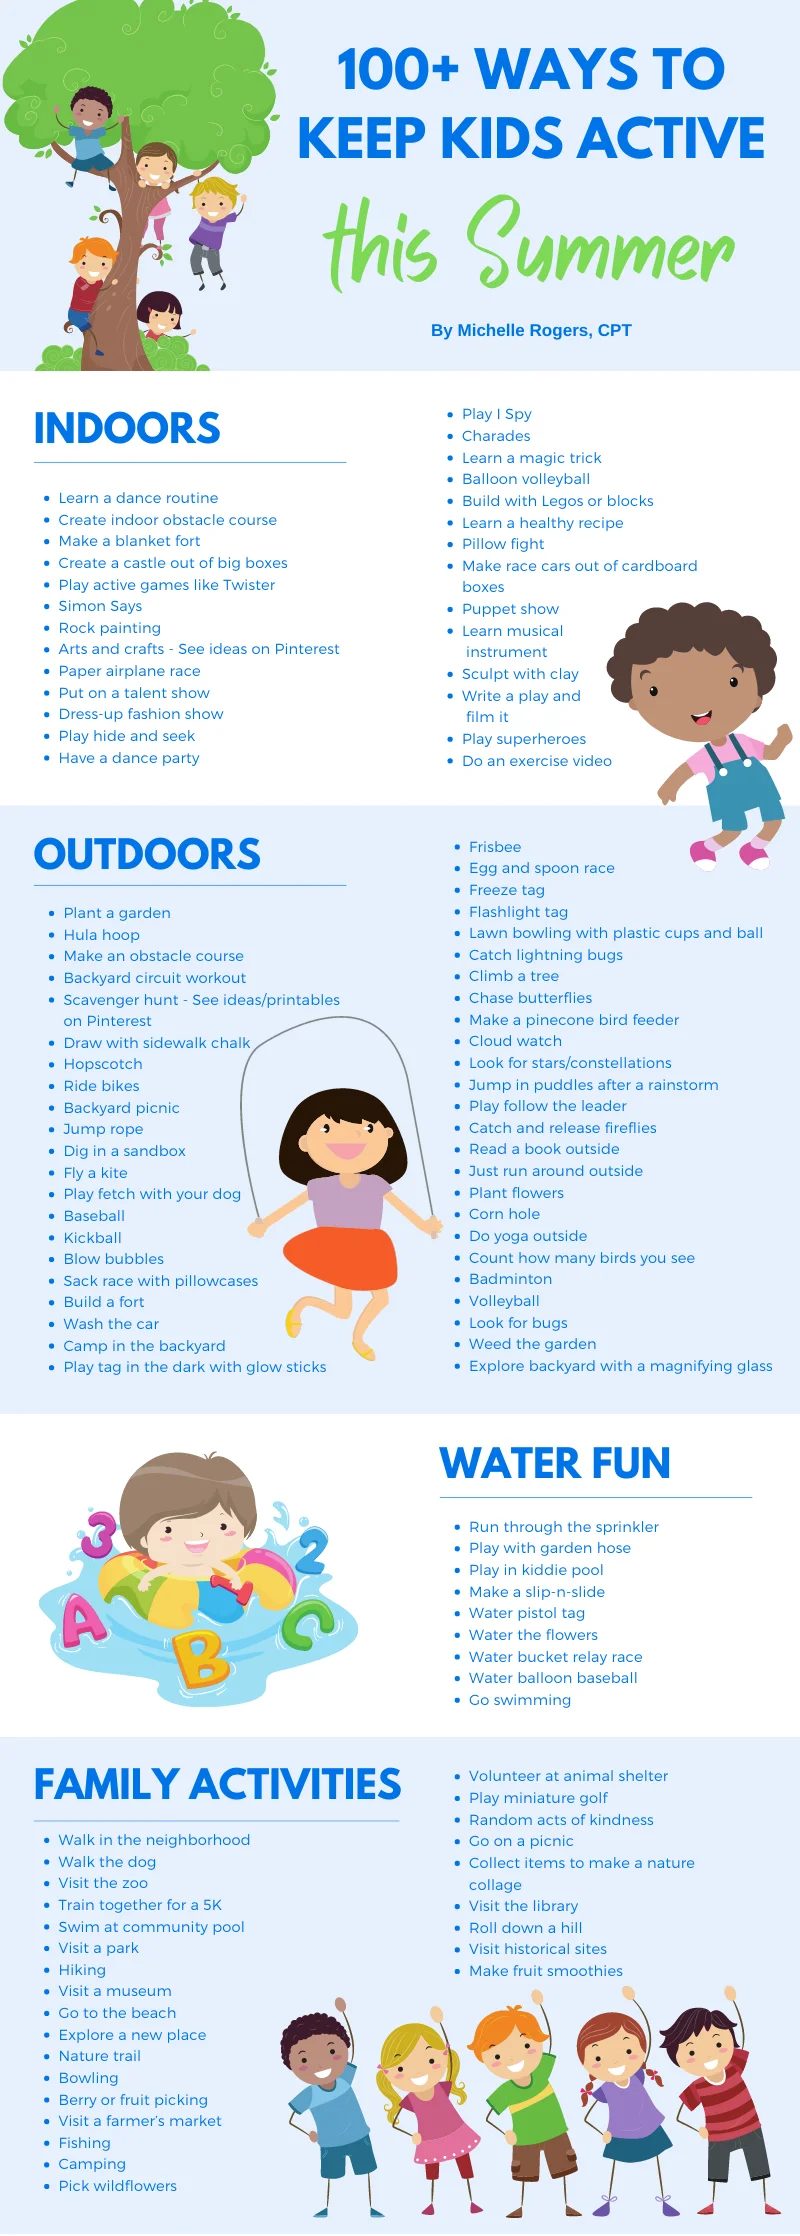 100-ways-to-keep-kids-active-this-summer-2